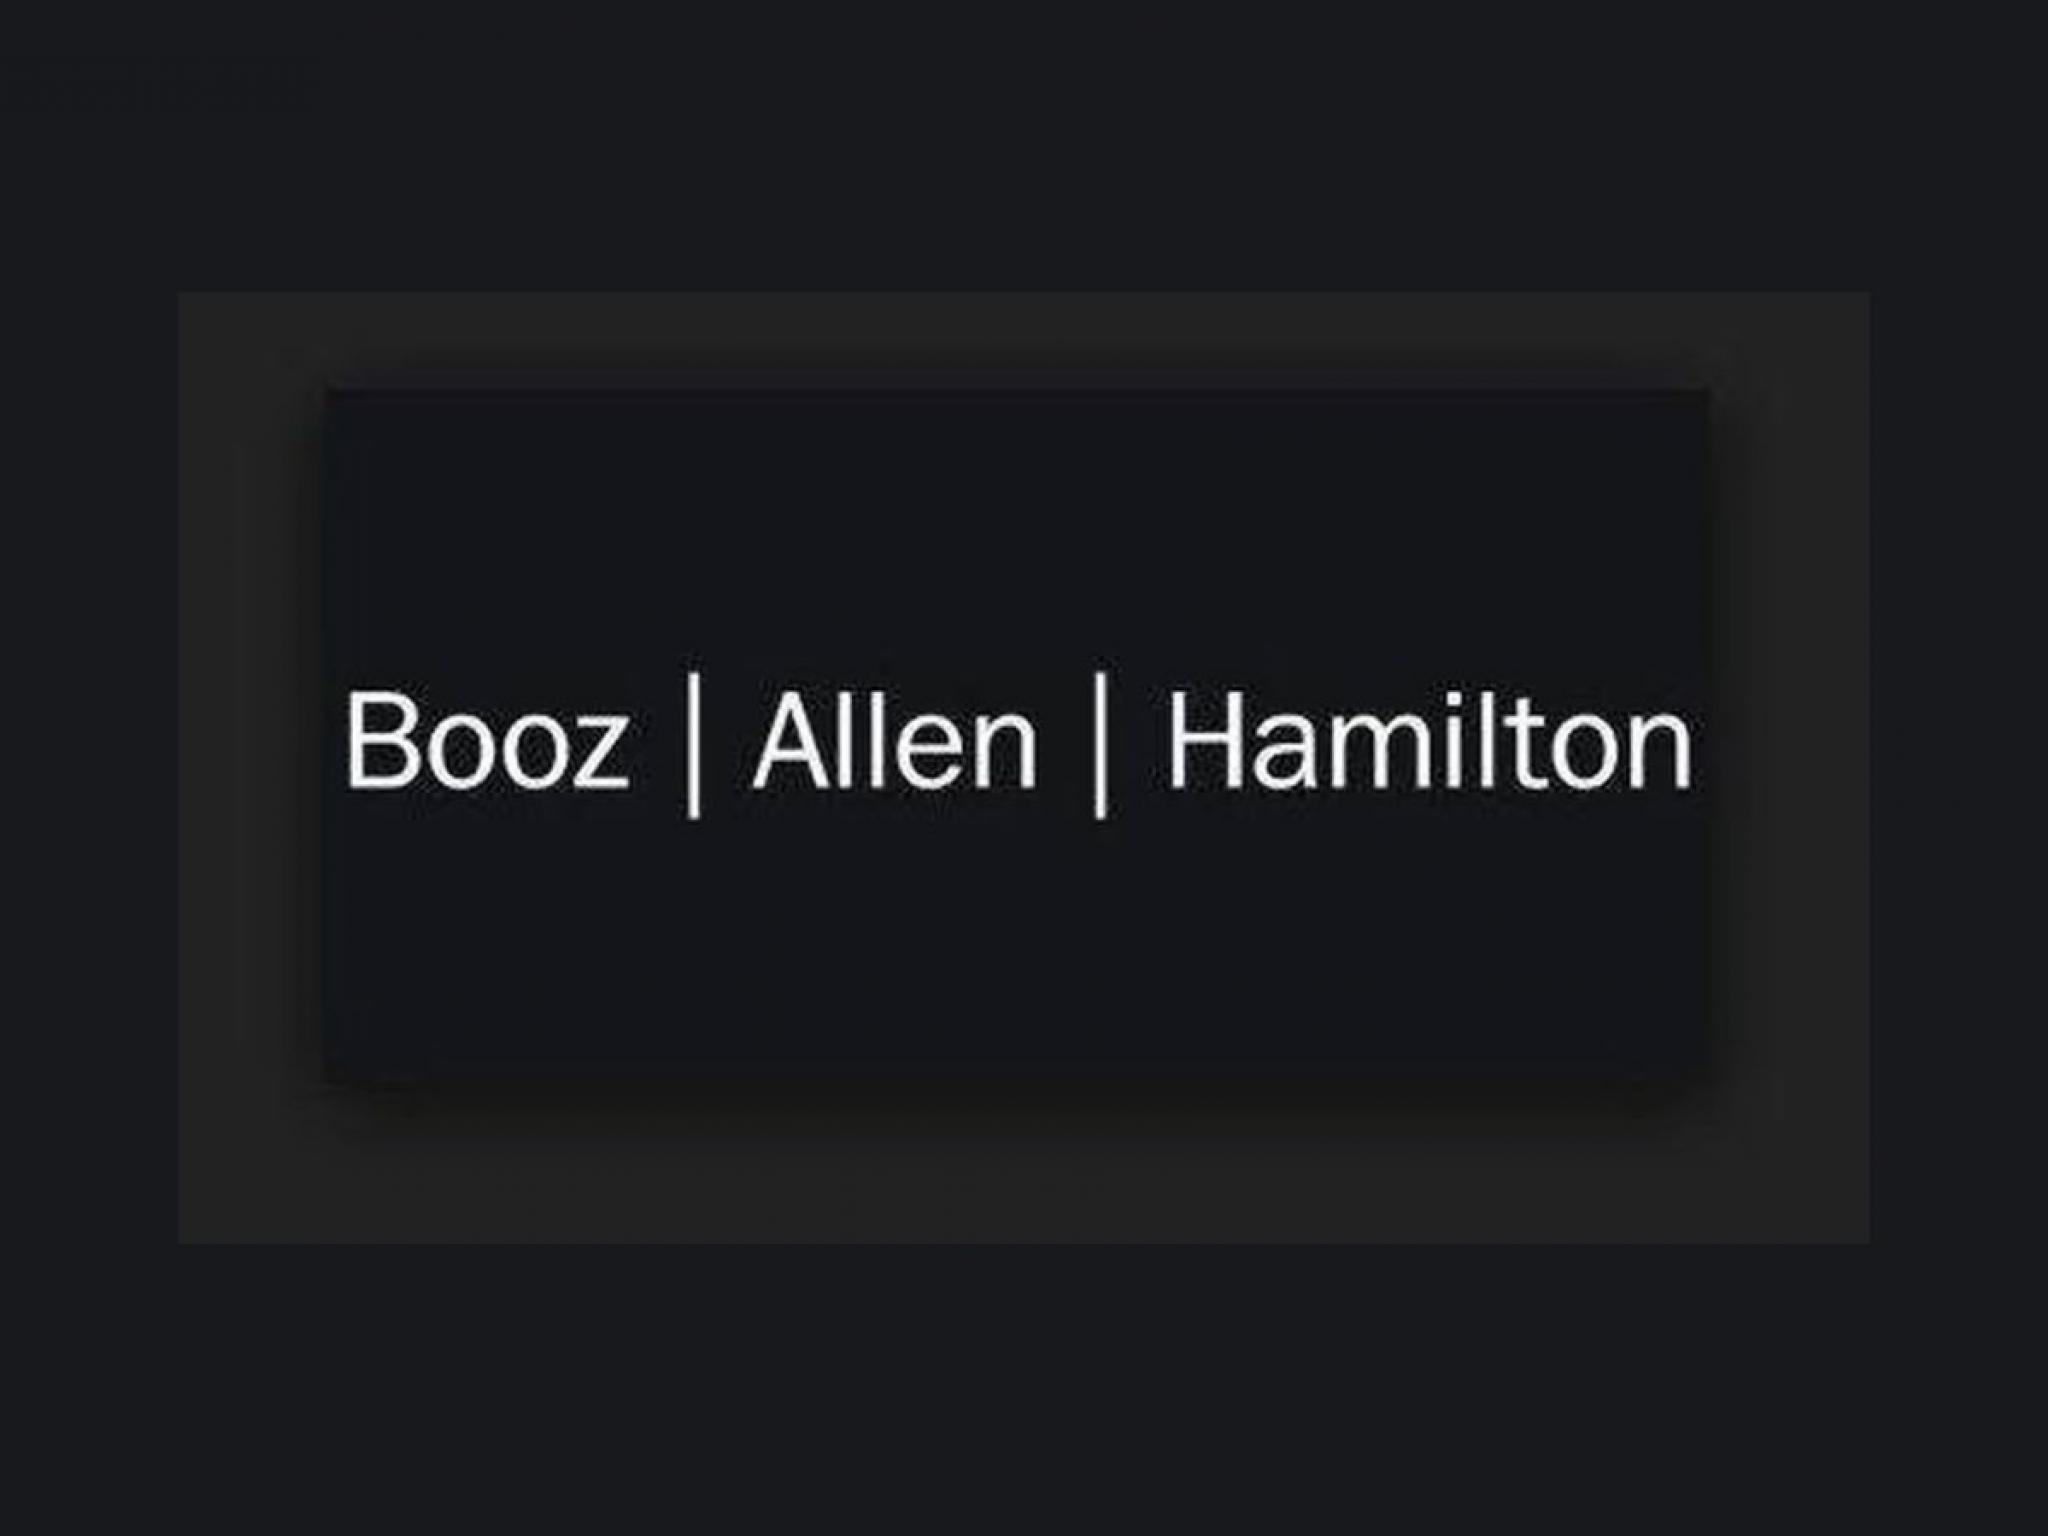  booz-allen-hamilton-posts-upbeat-results-joins-appfolio-gentex-and-other-big-stocks-moving-higher-on-friday 